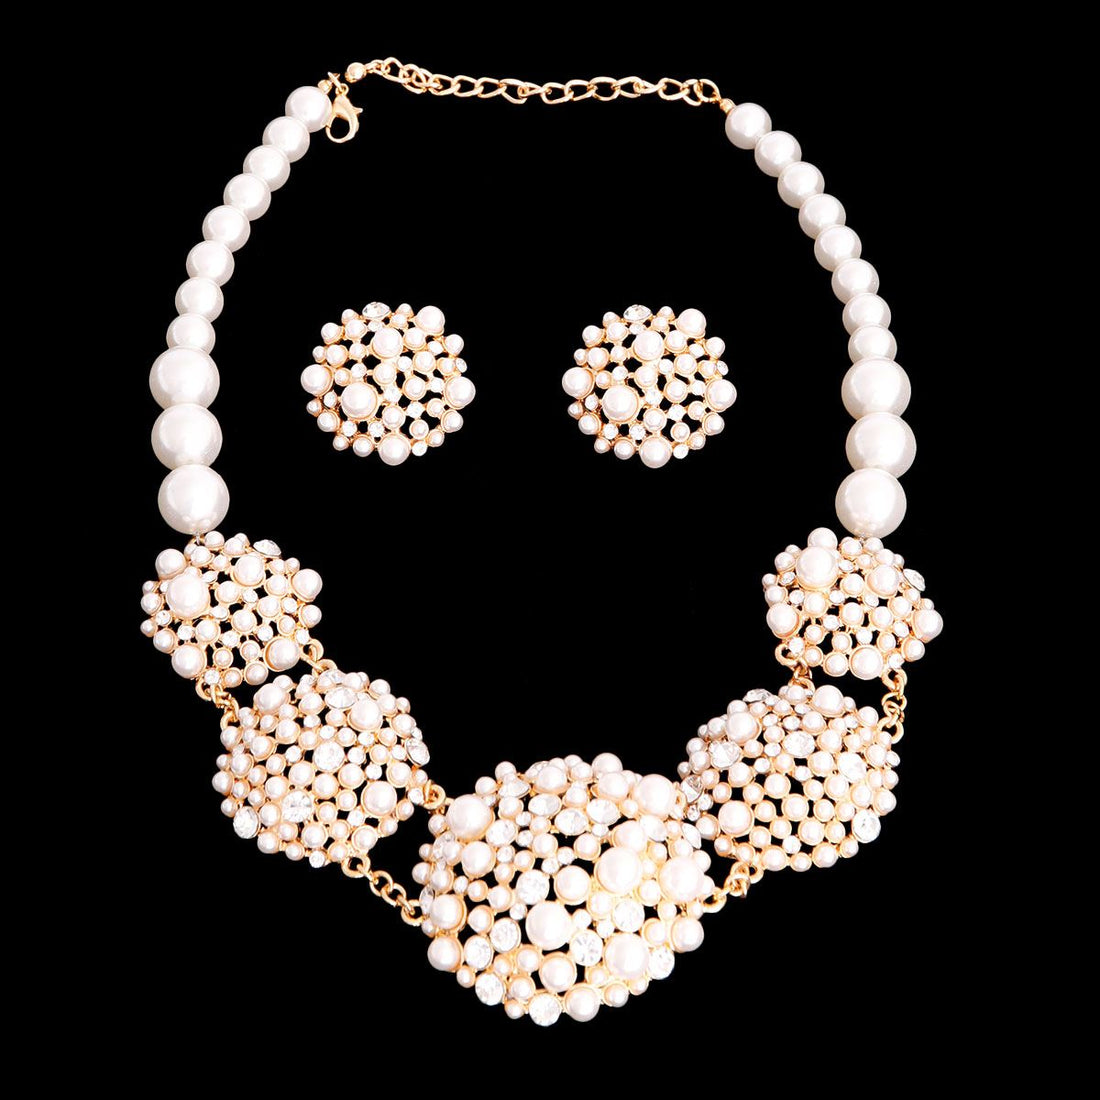 5 Round Cream Pearl Cluster Necklace